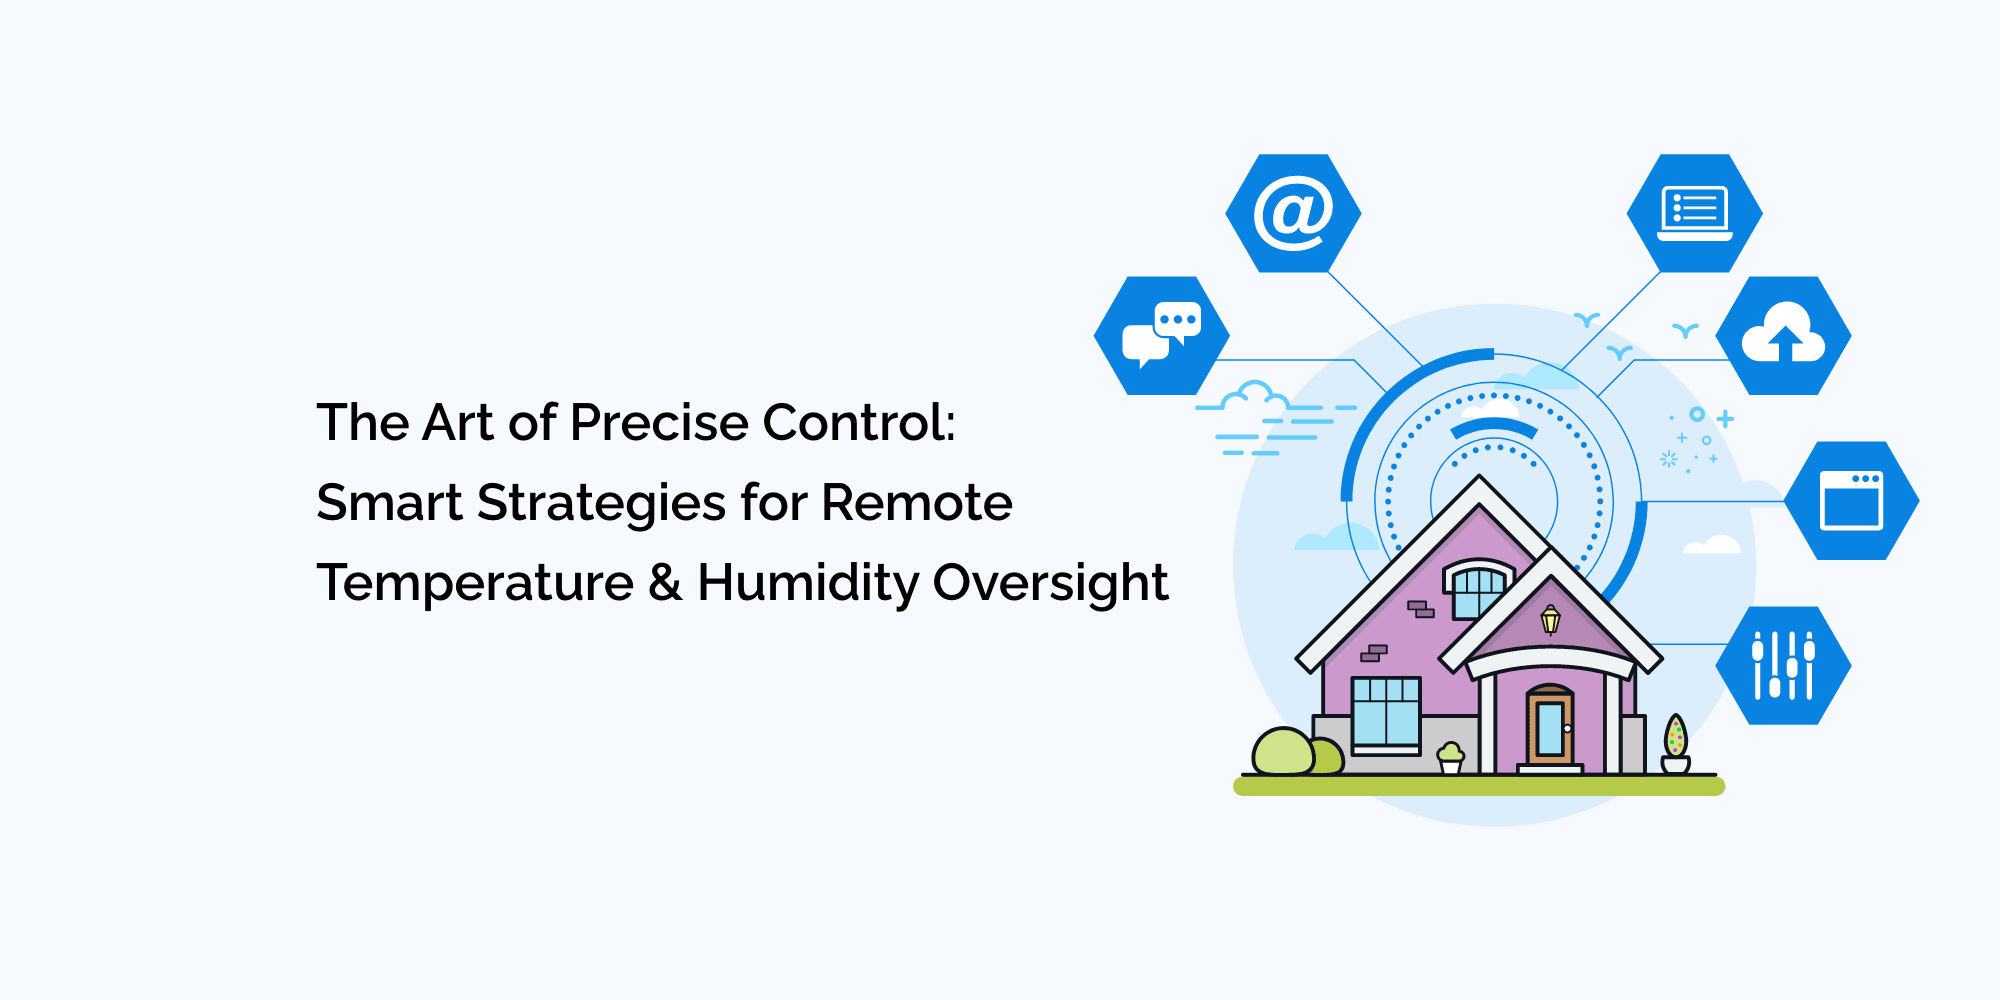 The Art of Precise Control: Smart Strategies for Remote Temperature and Humidity Oversight